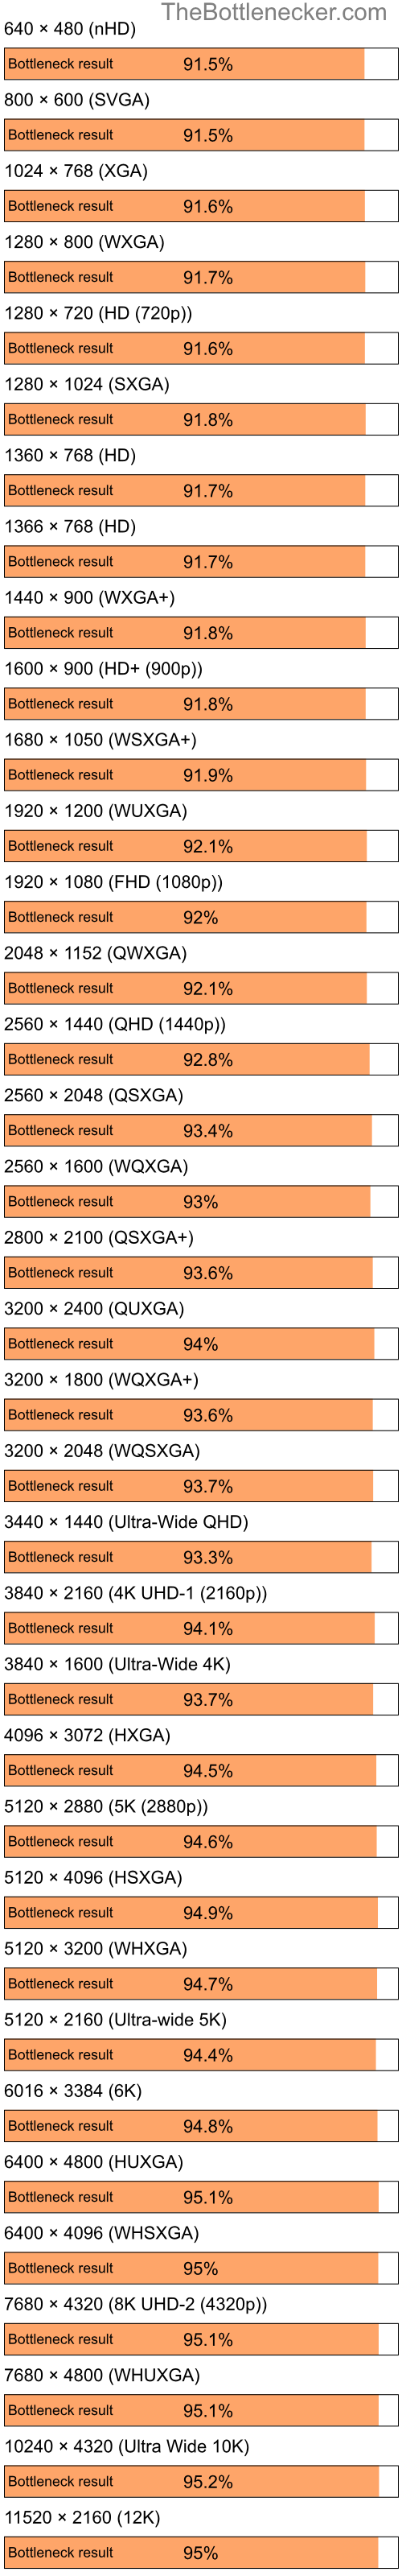 Bottleneck results by resolution for Intel Atom Z520 and NVIDIA GeForce4 MX 440 in Graphic Card Intense Tasks